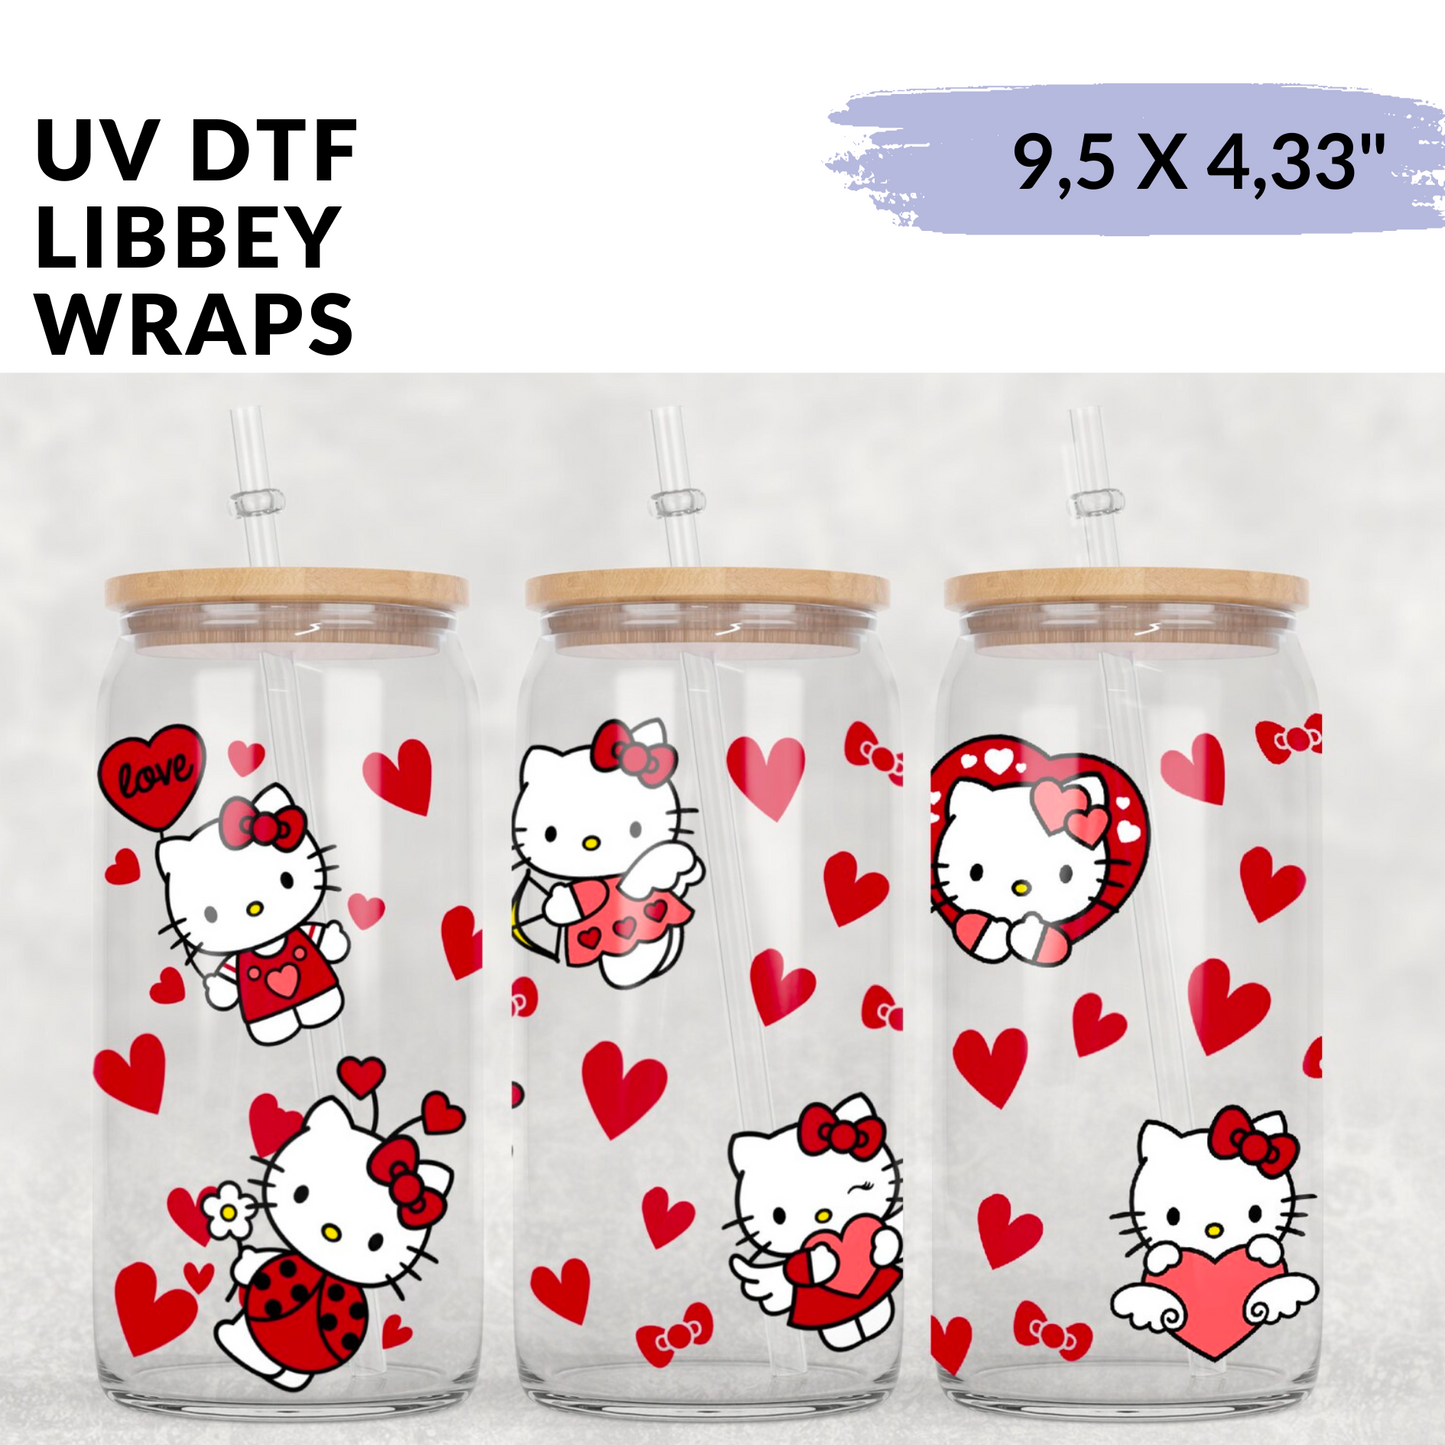 UV DTF - Ladybug and Kitty Red Hearts Libbey cup Wrap